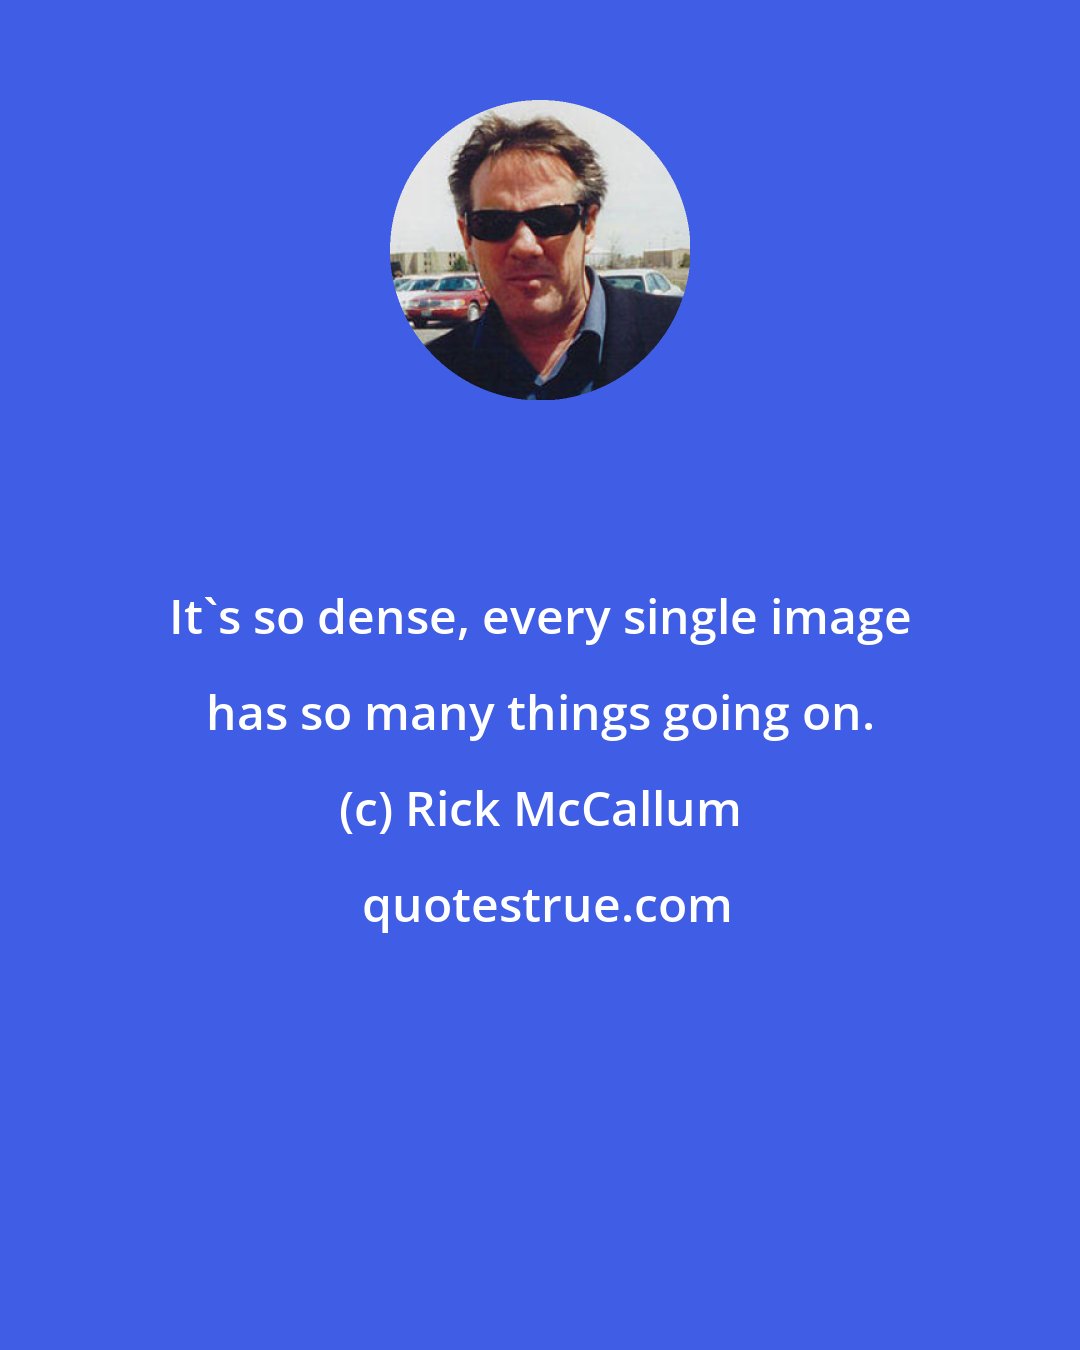 Rick McCallum: It's so dense, every single image has so many things going on.